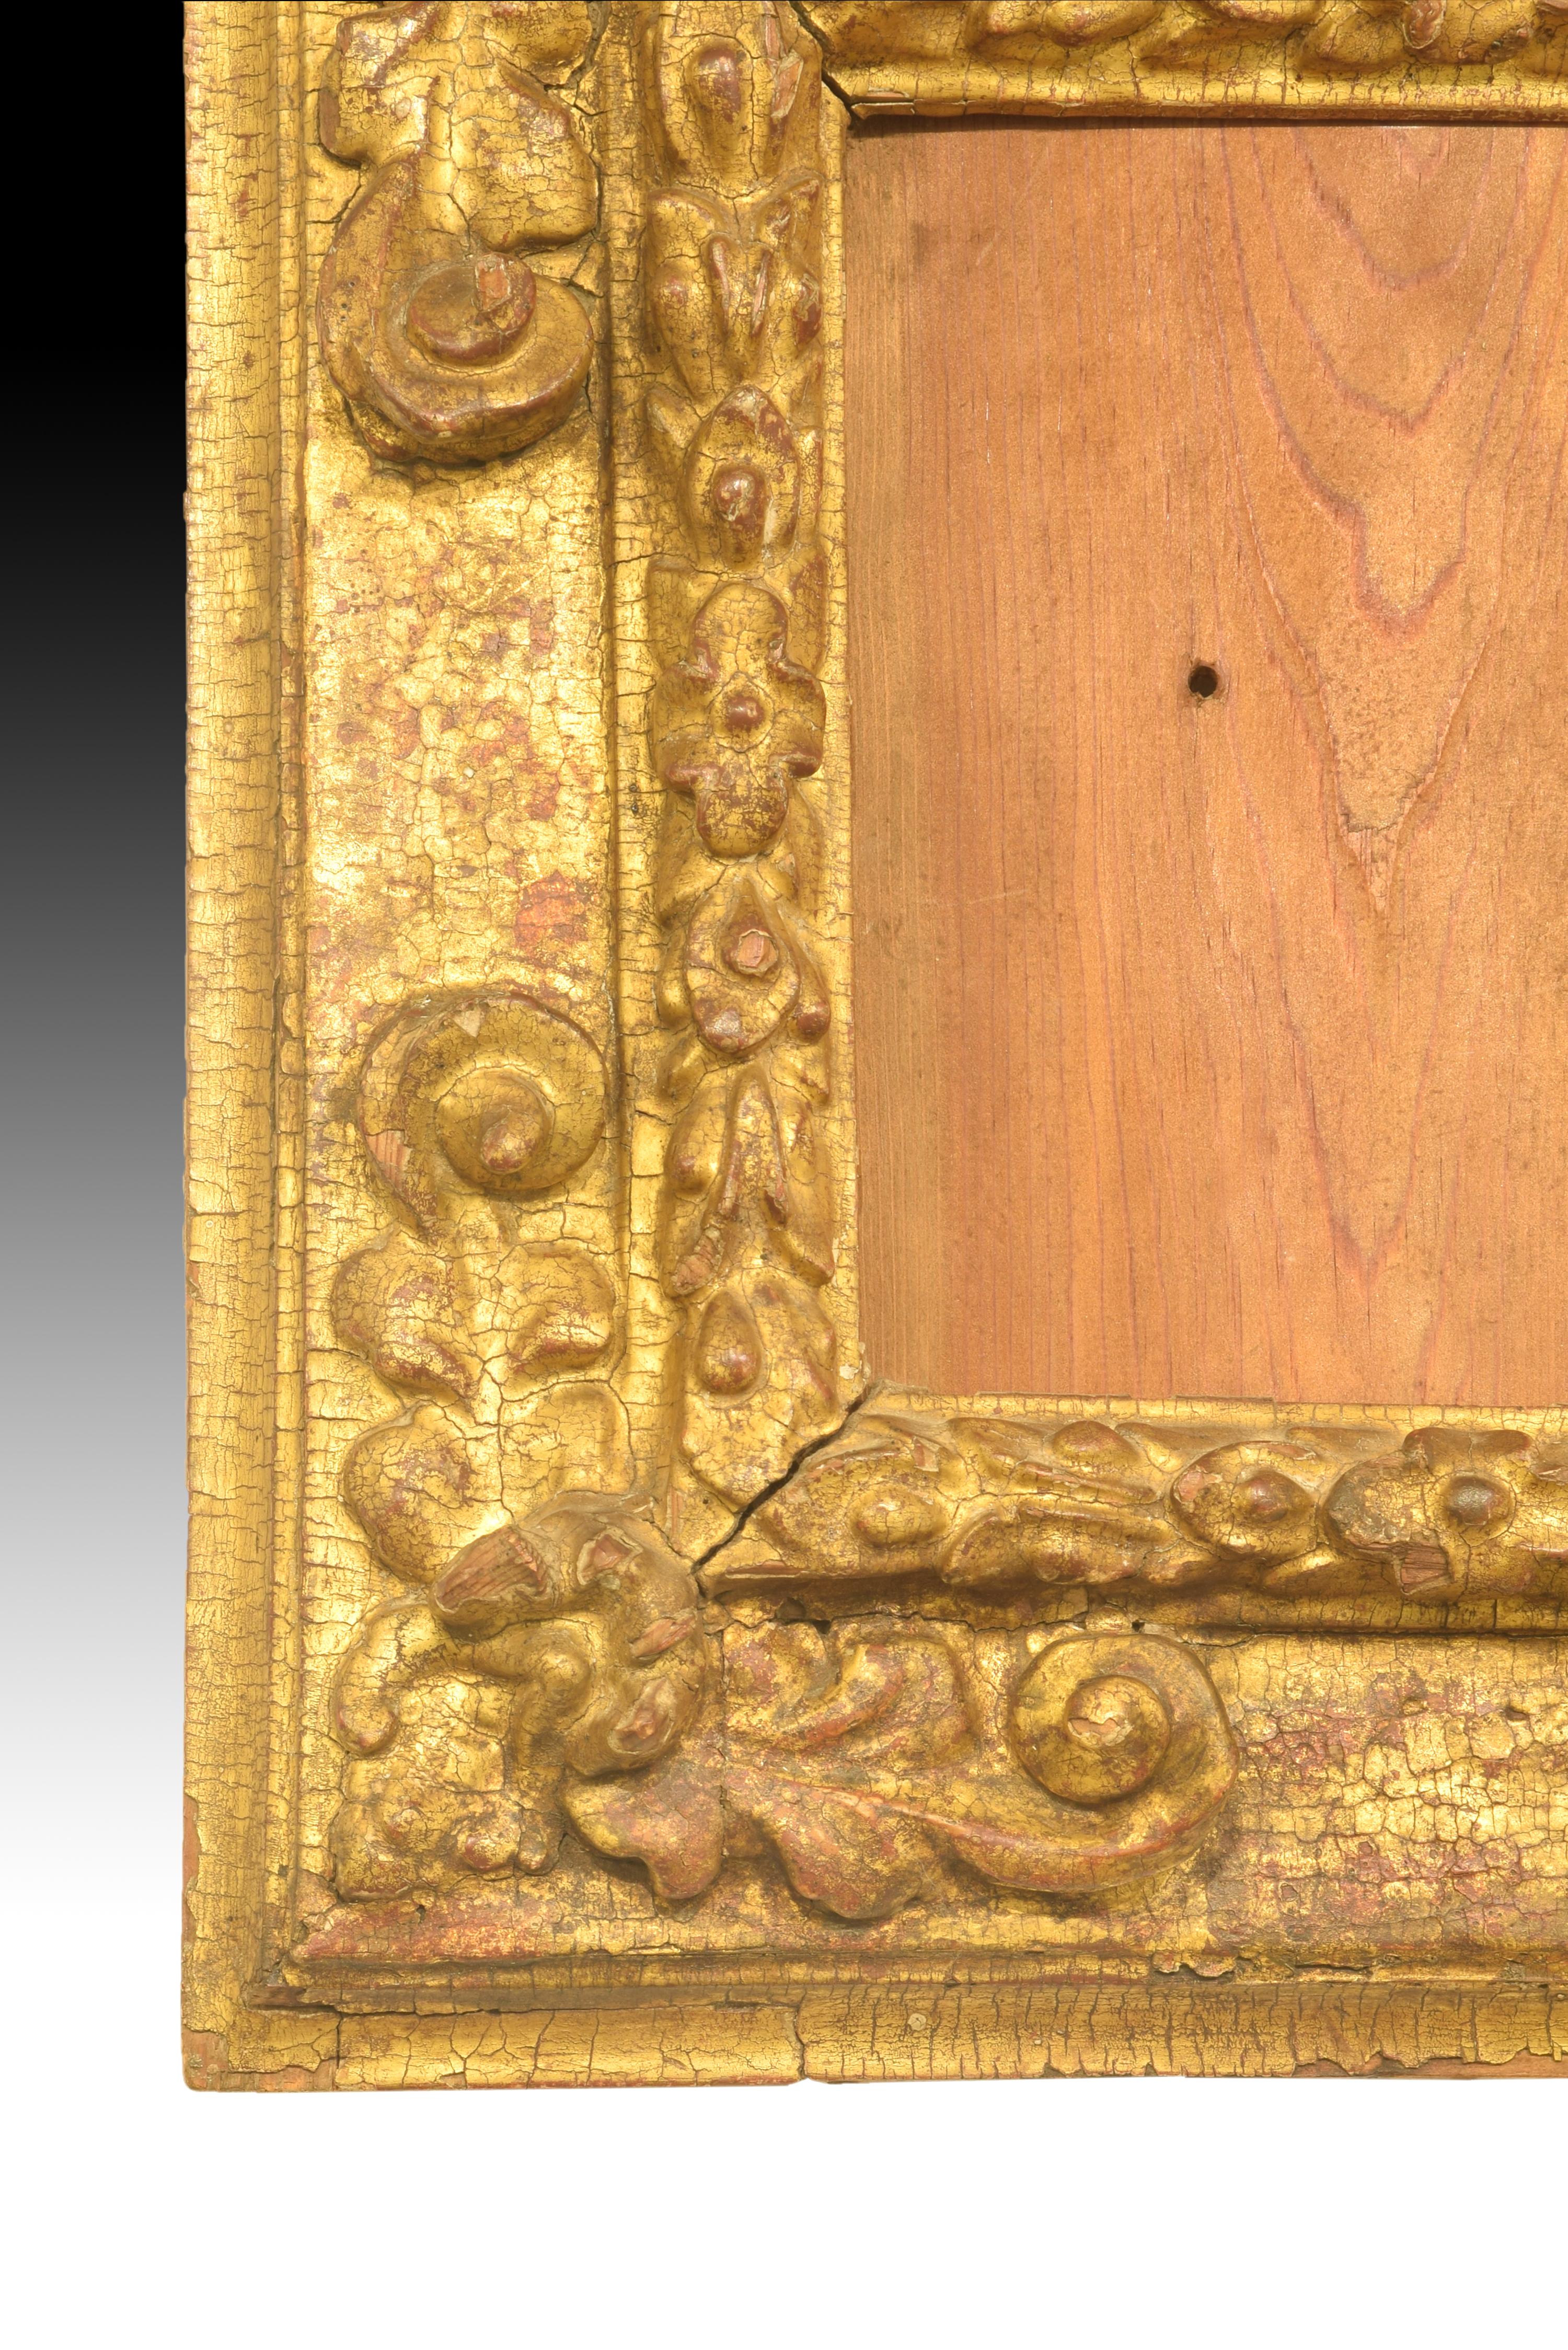 Slightly rectangular frame in carved and gilded wood decorated with a series of bands: on the outside, a smooth molding; to the centre another wider one with vegetal motifs in the corners, arranged around a central detail; to the interior, another